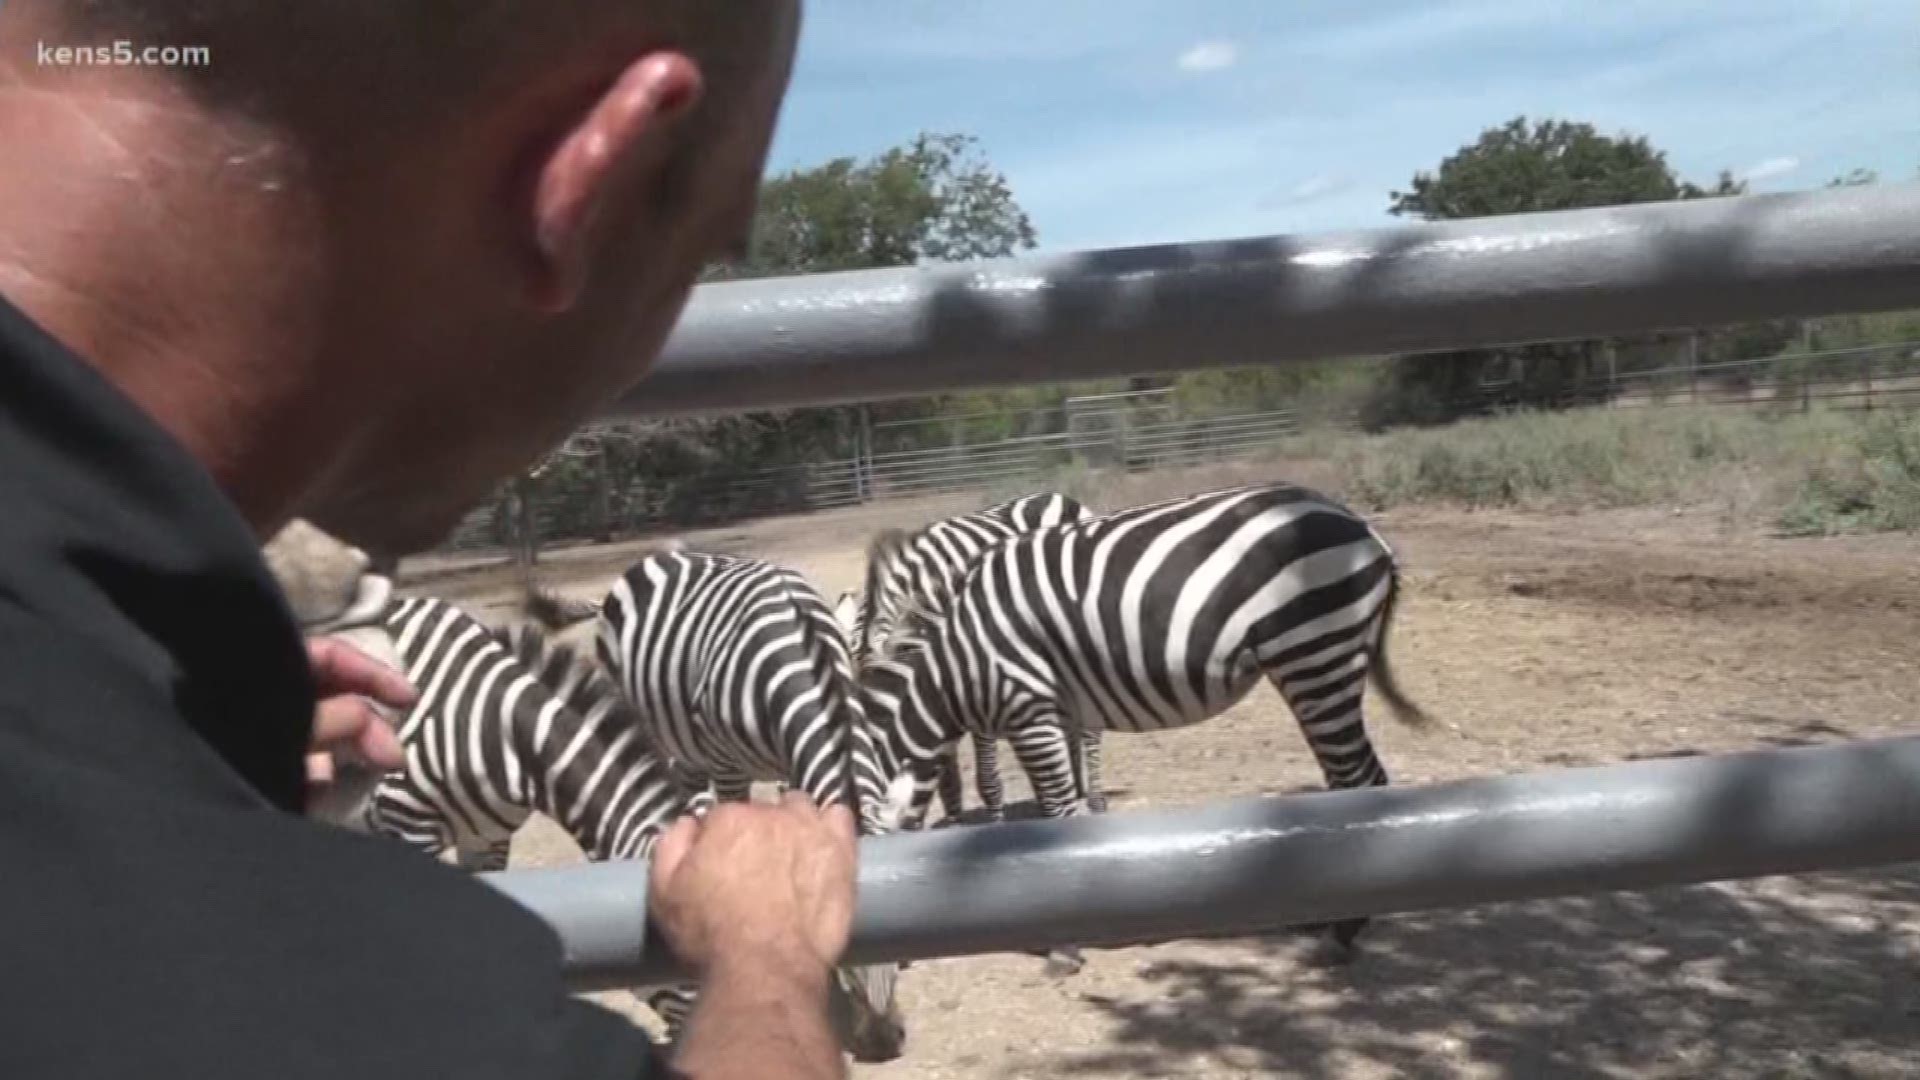 After two zebras died after escaping from their owner in New Braunfels this week, many Texans are asking about the legality of owning the exotic animals.